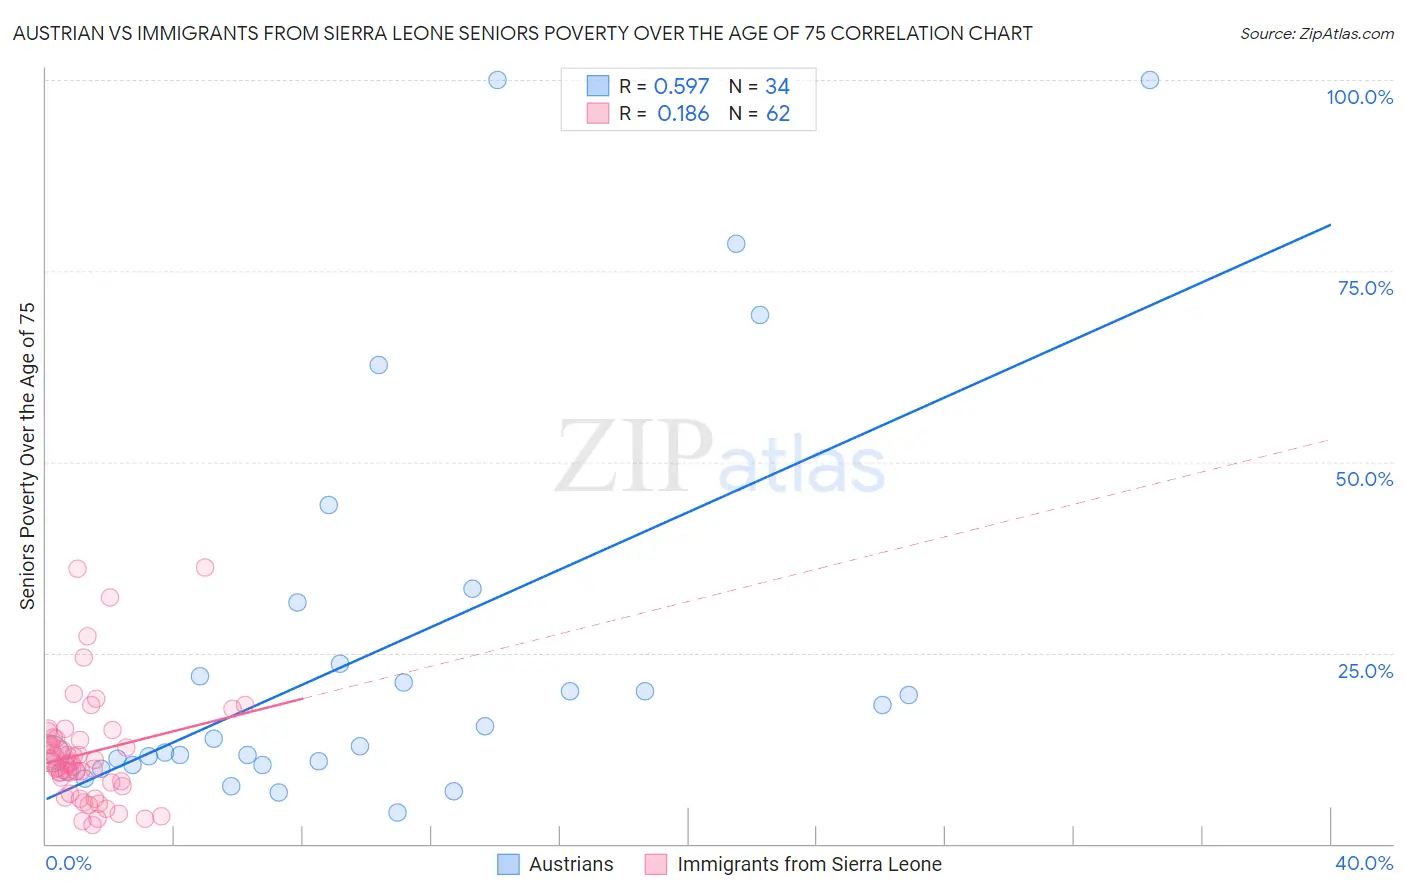 Austrian vs Immigrants from Sierra Leone Seniors Poverty Over the Age of 75